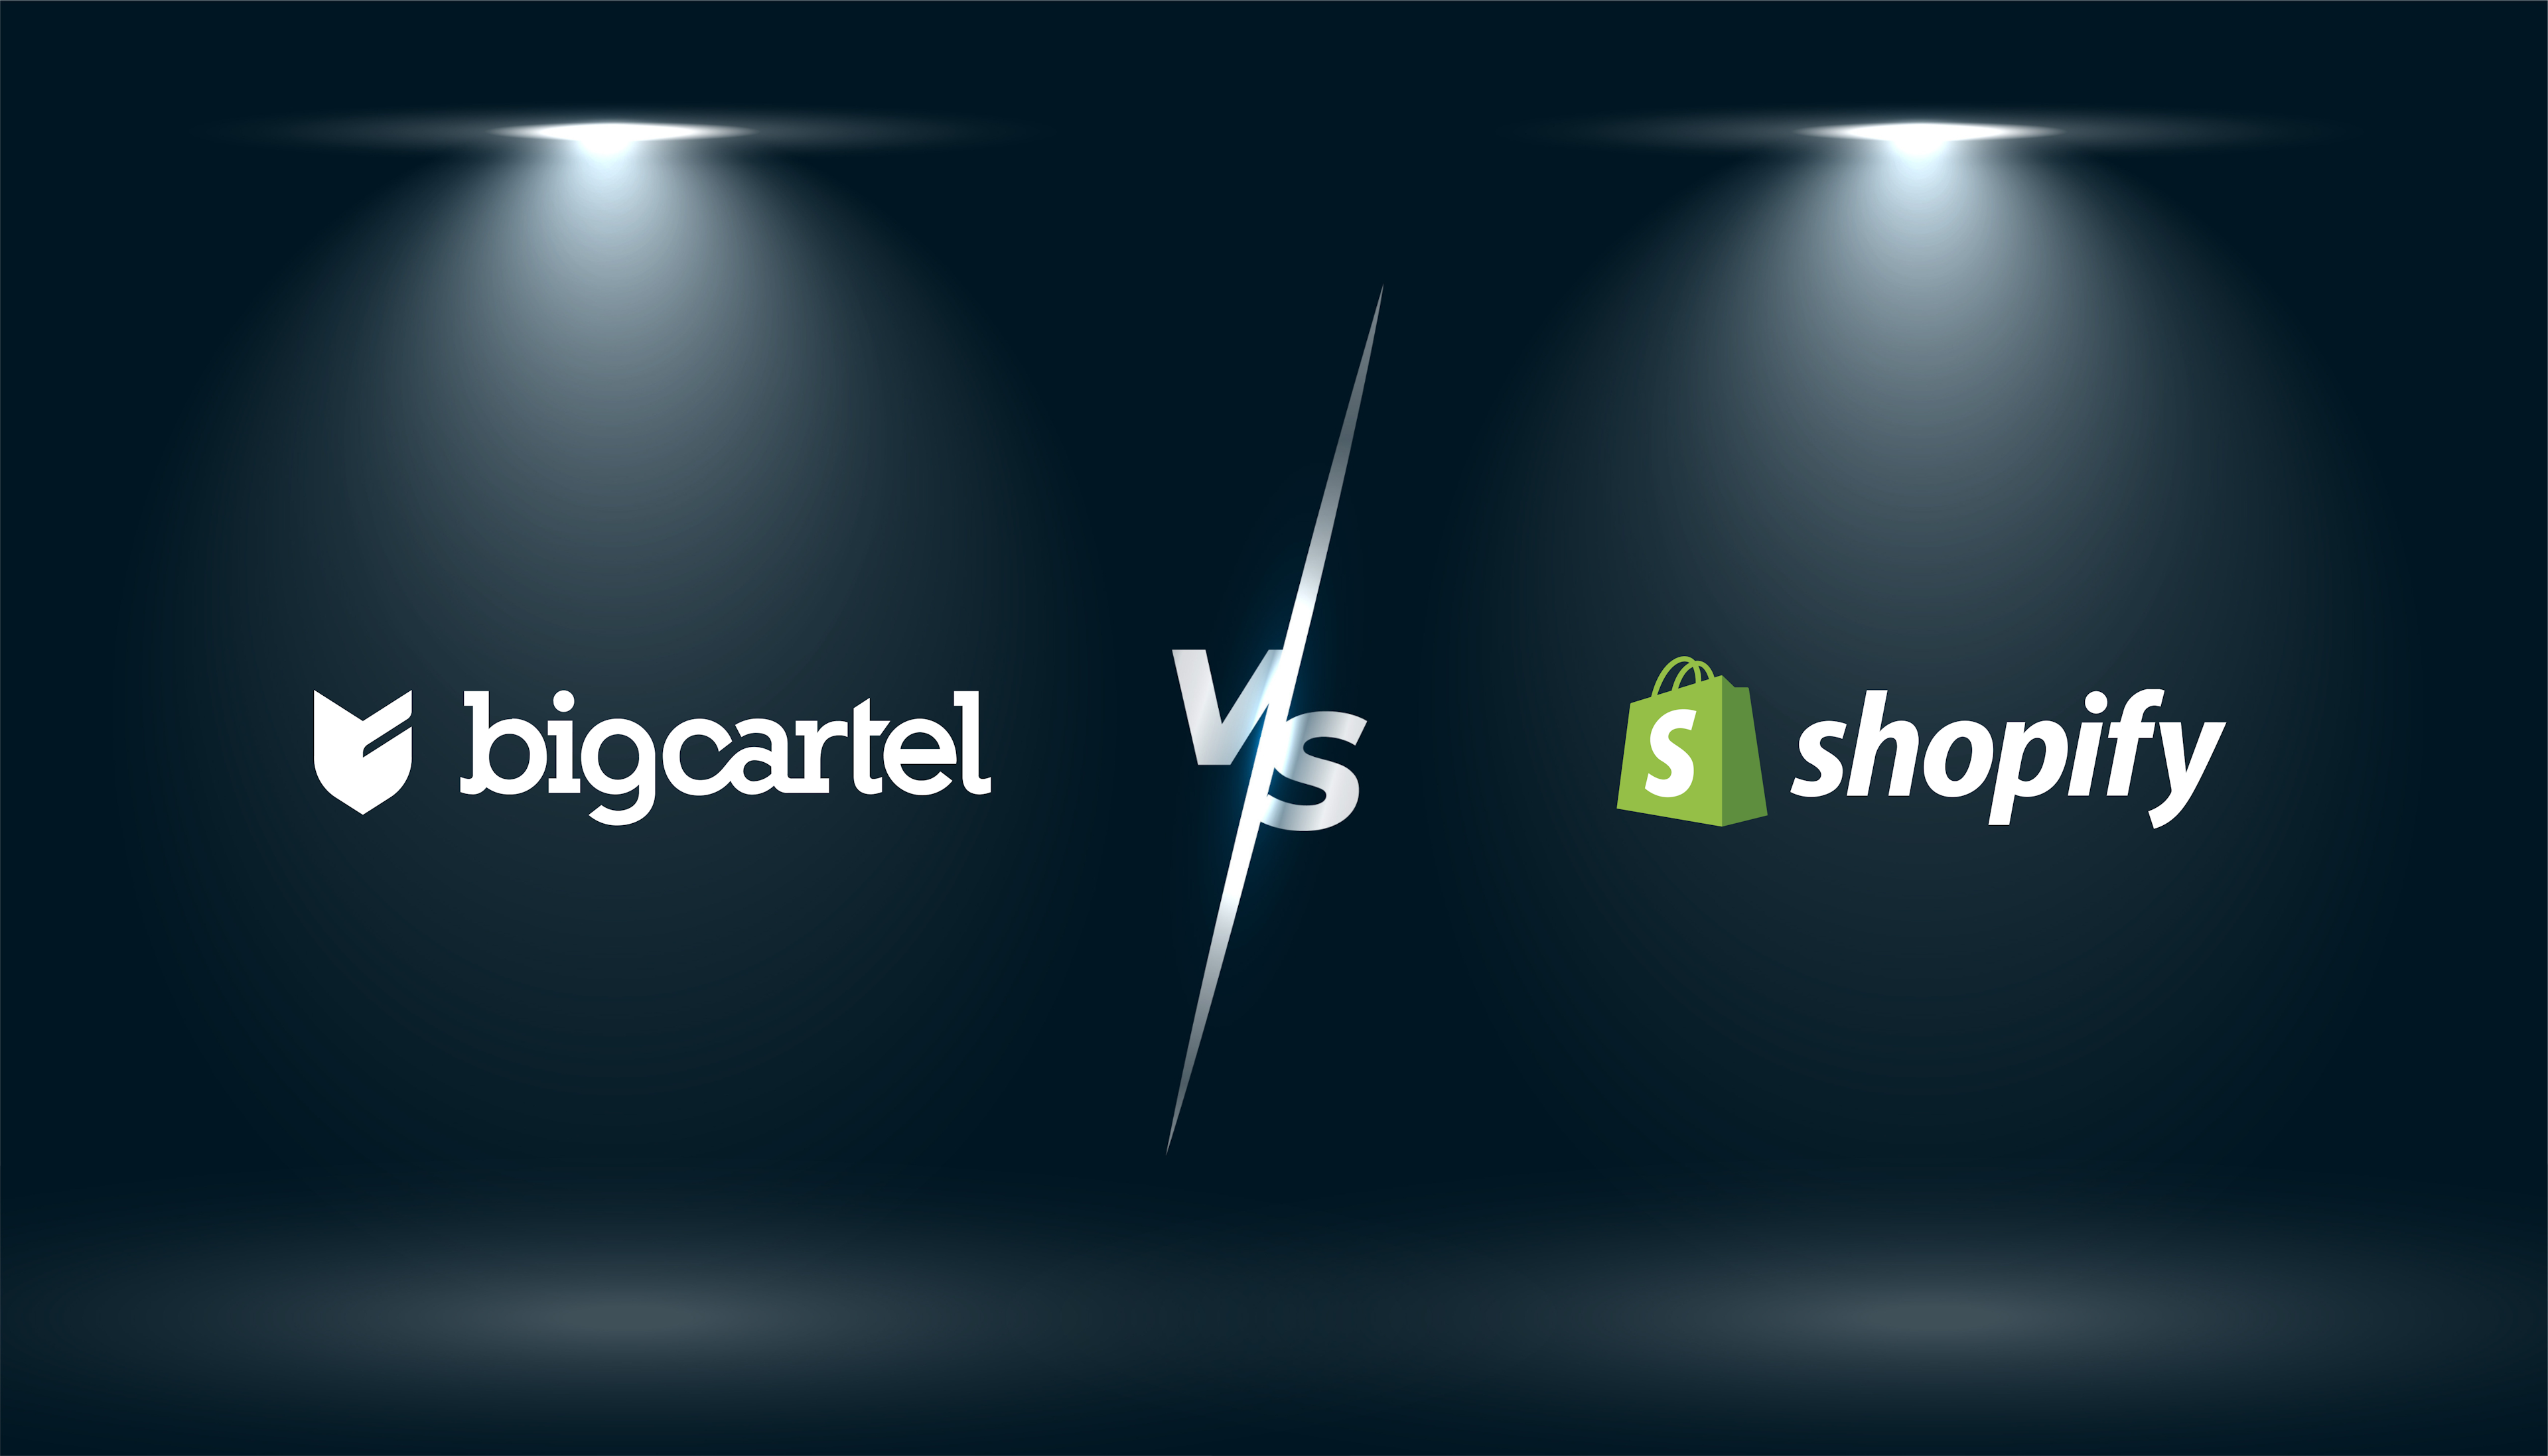 image that shows the comparison of the Bigcartel logo on the left side and the Shopify logo on the right side with a VS in the middle